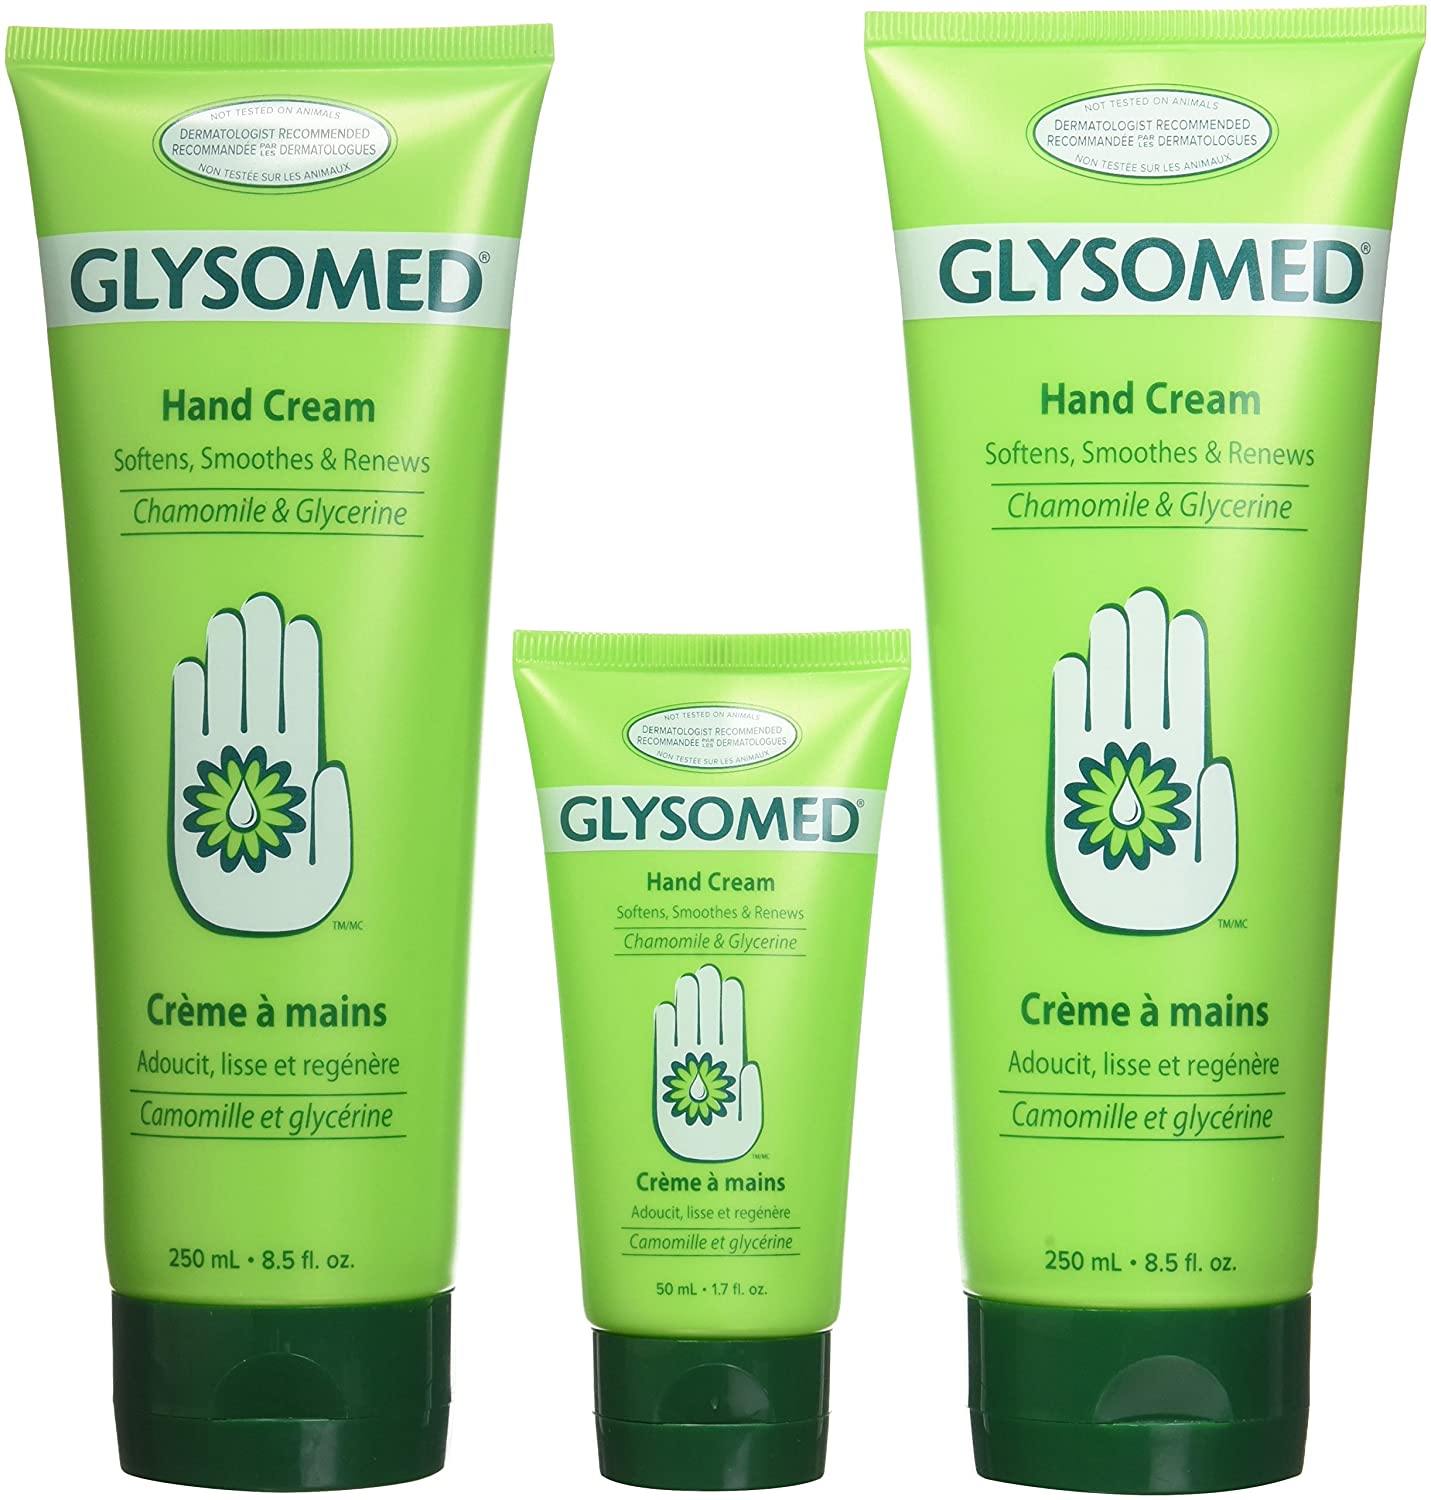 GLYSOMED HAND CREAM - Well Plus Compounding Pharmacy